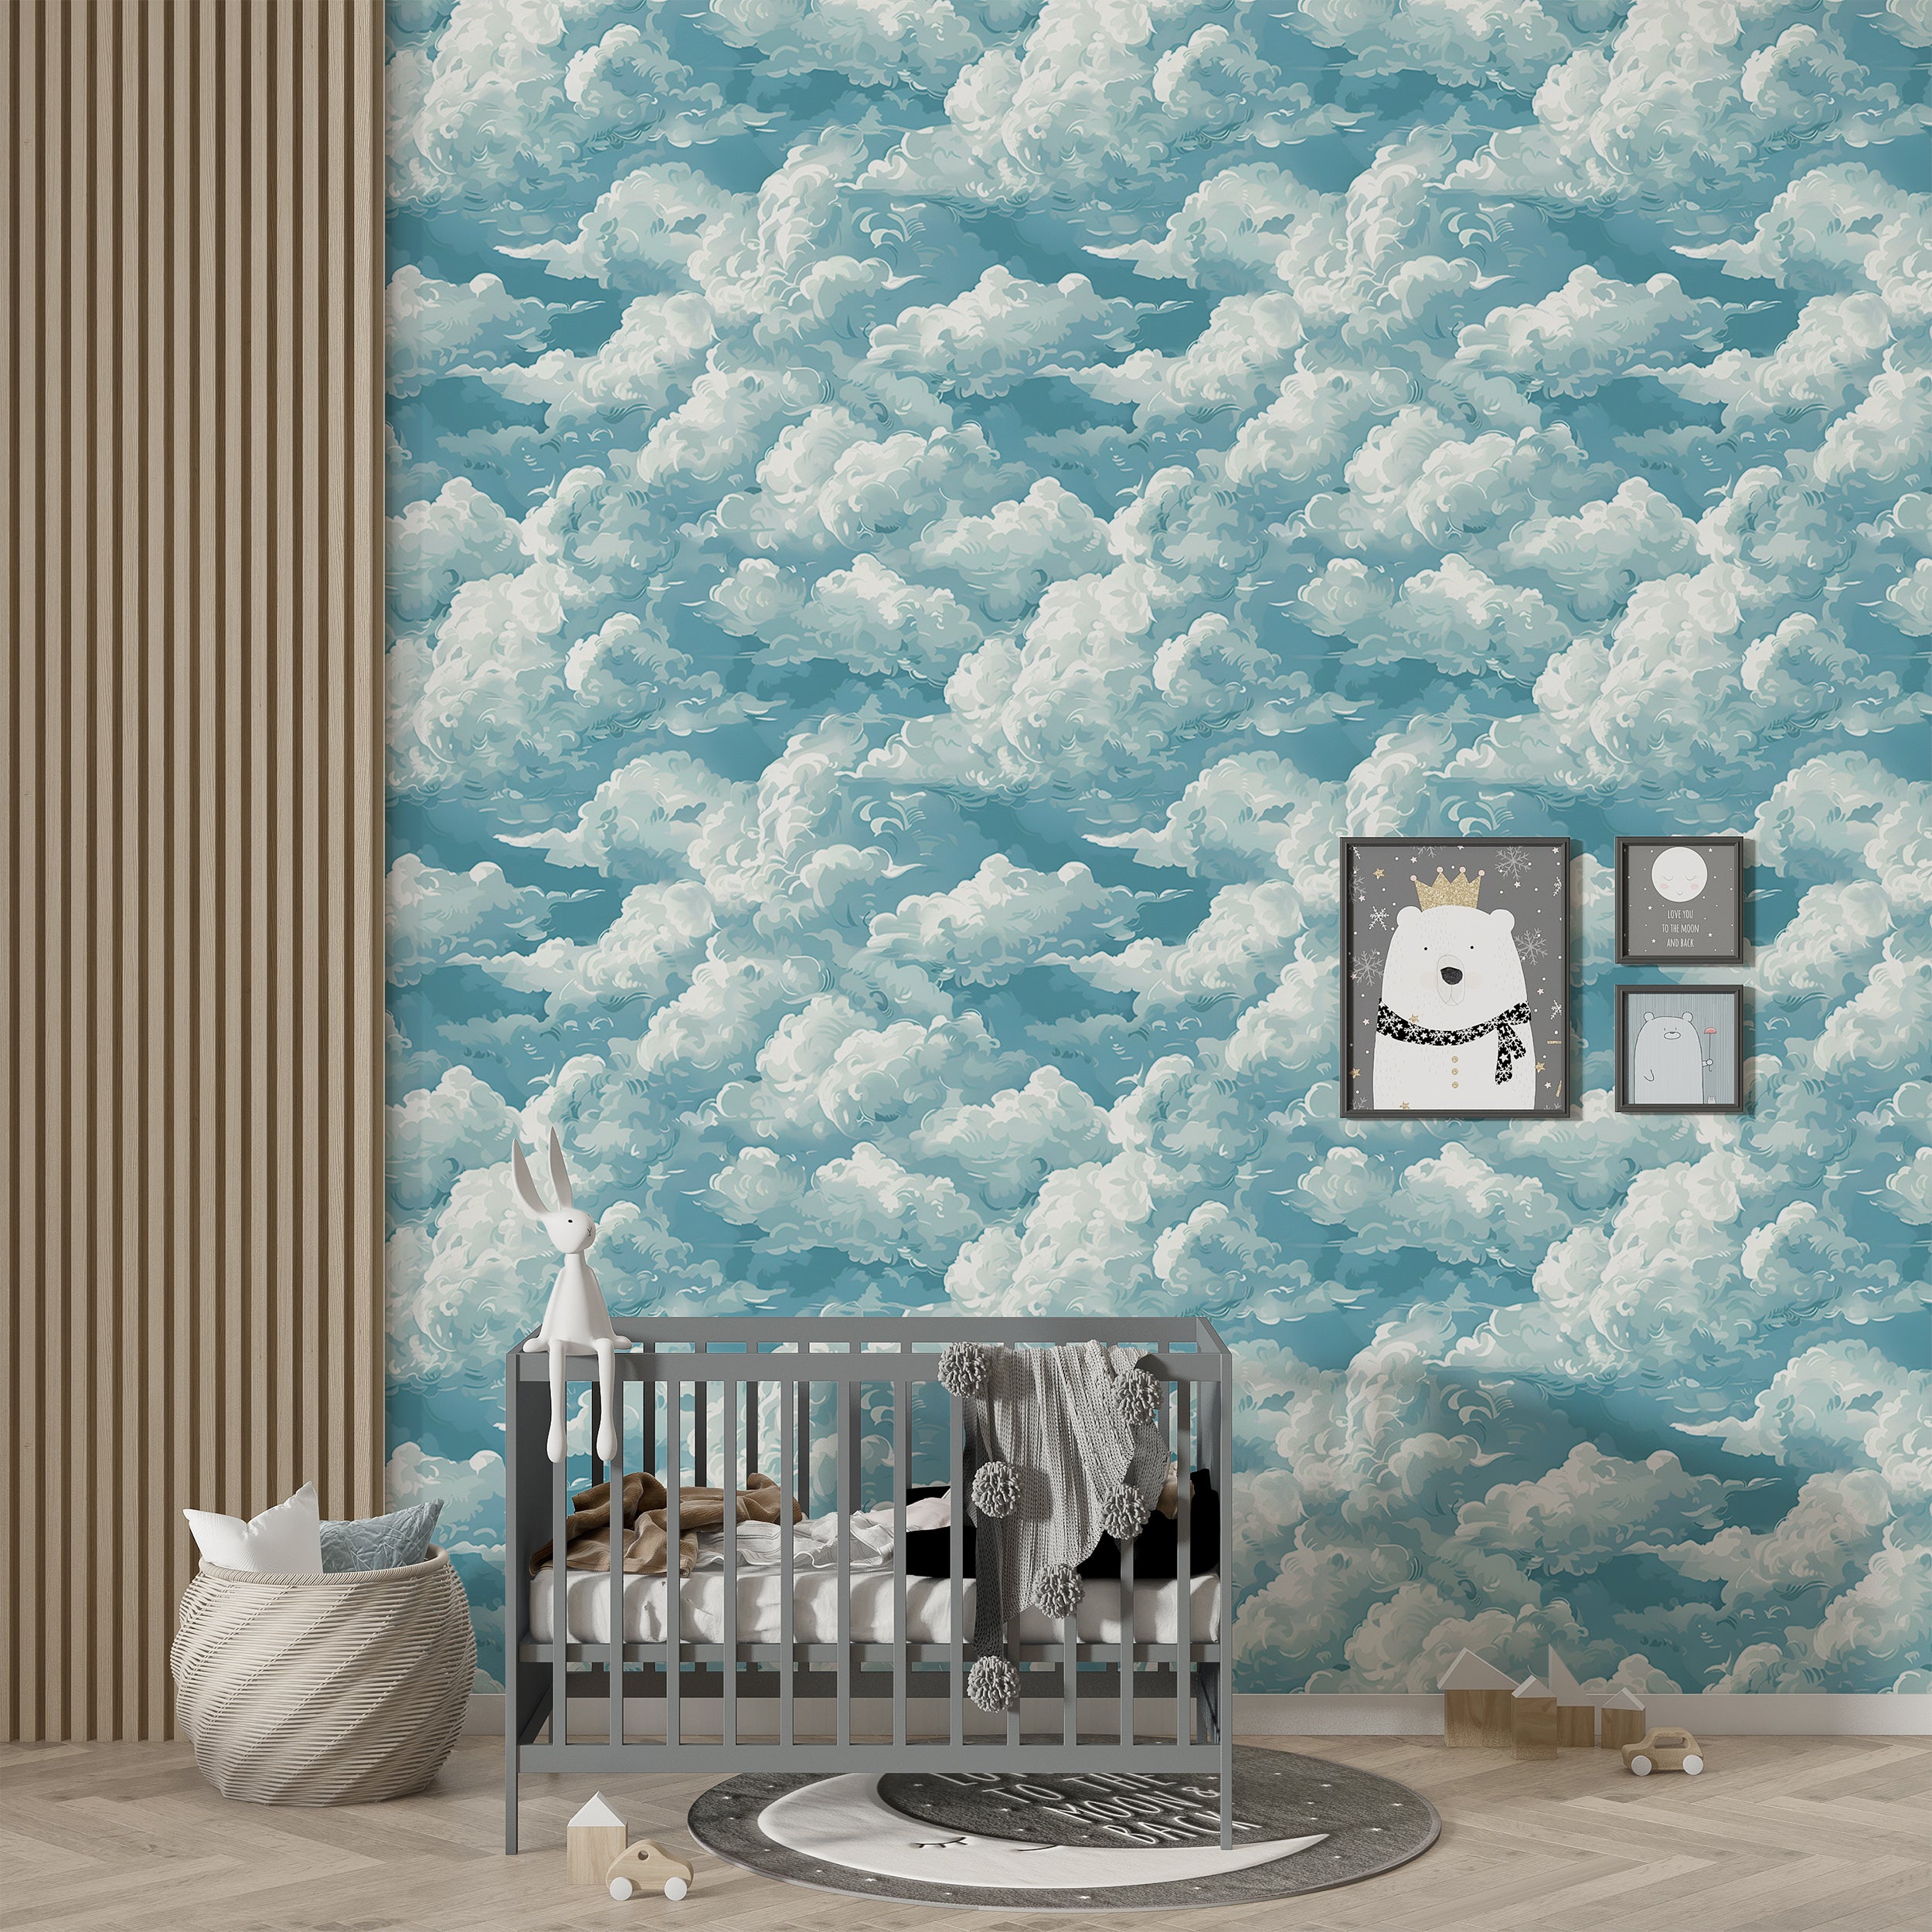 Easy peel and stick cloud wallpaper Fluffy clouds wall decor for kids room